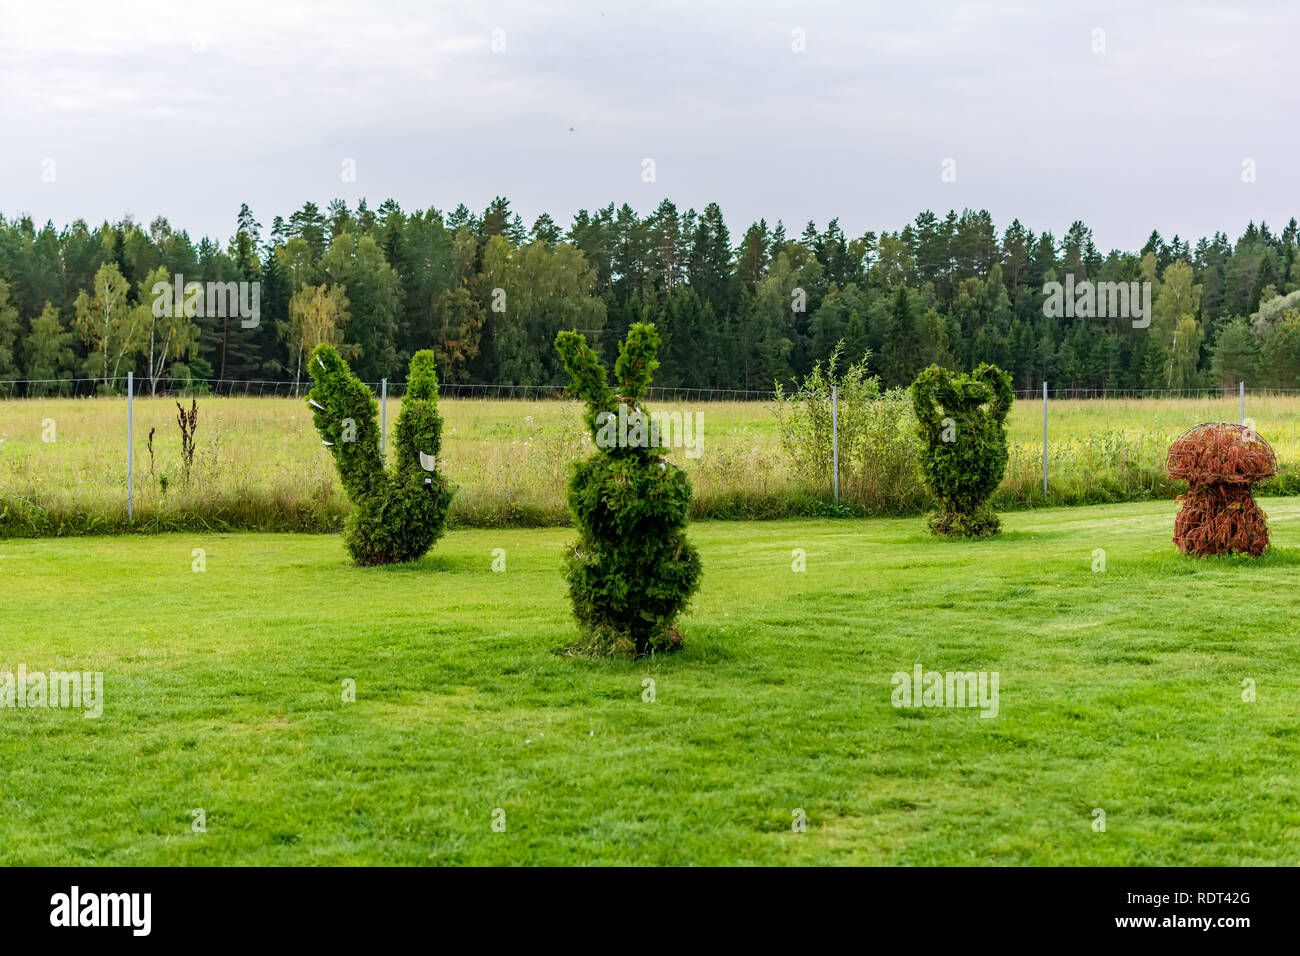 Anyksciai, Lithuania - September 8, 2018: Rabbit, swan, vase and mushroom shaped bushes in a topiary garden. Green figures made of arborvitae. Stock Photo